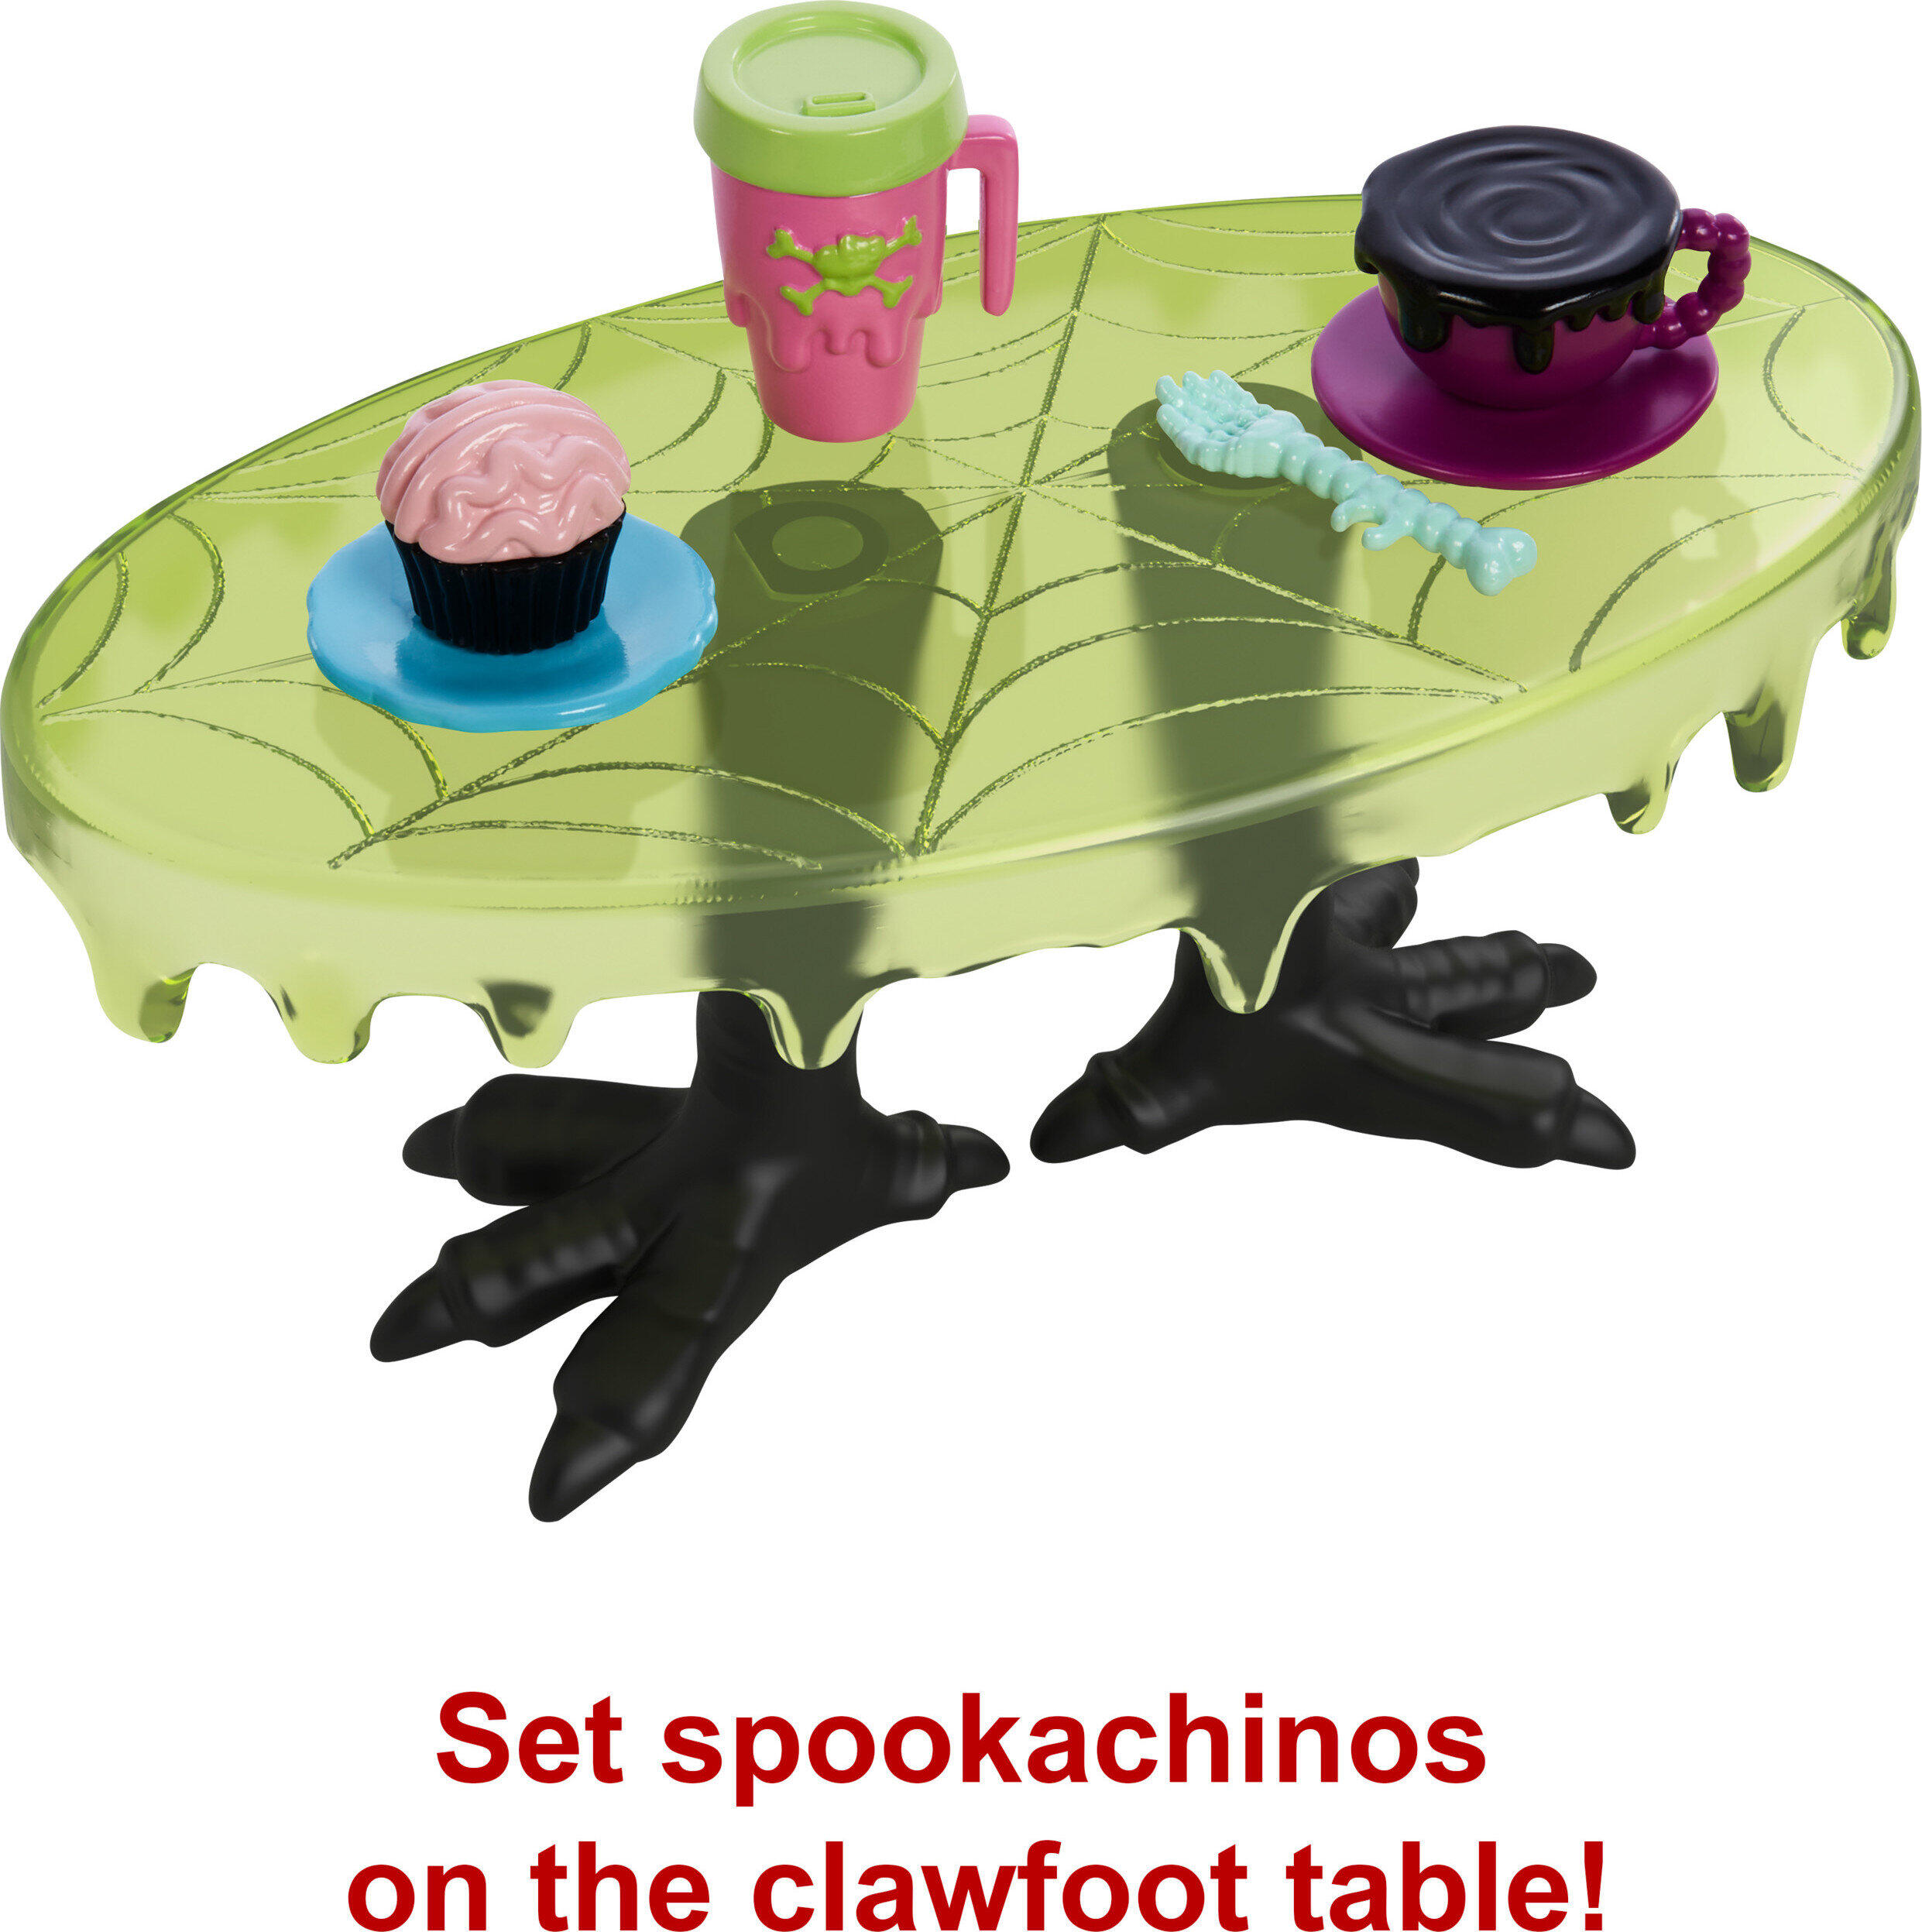 Monster High The Coffin Bean Playset with Cafe Furniture, Drink and Snack Accessories, Multicolor - image 5 of 7